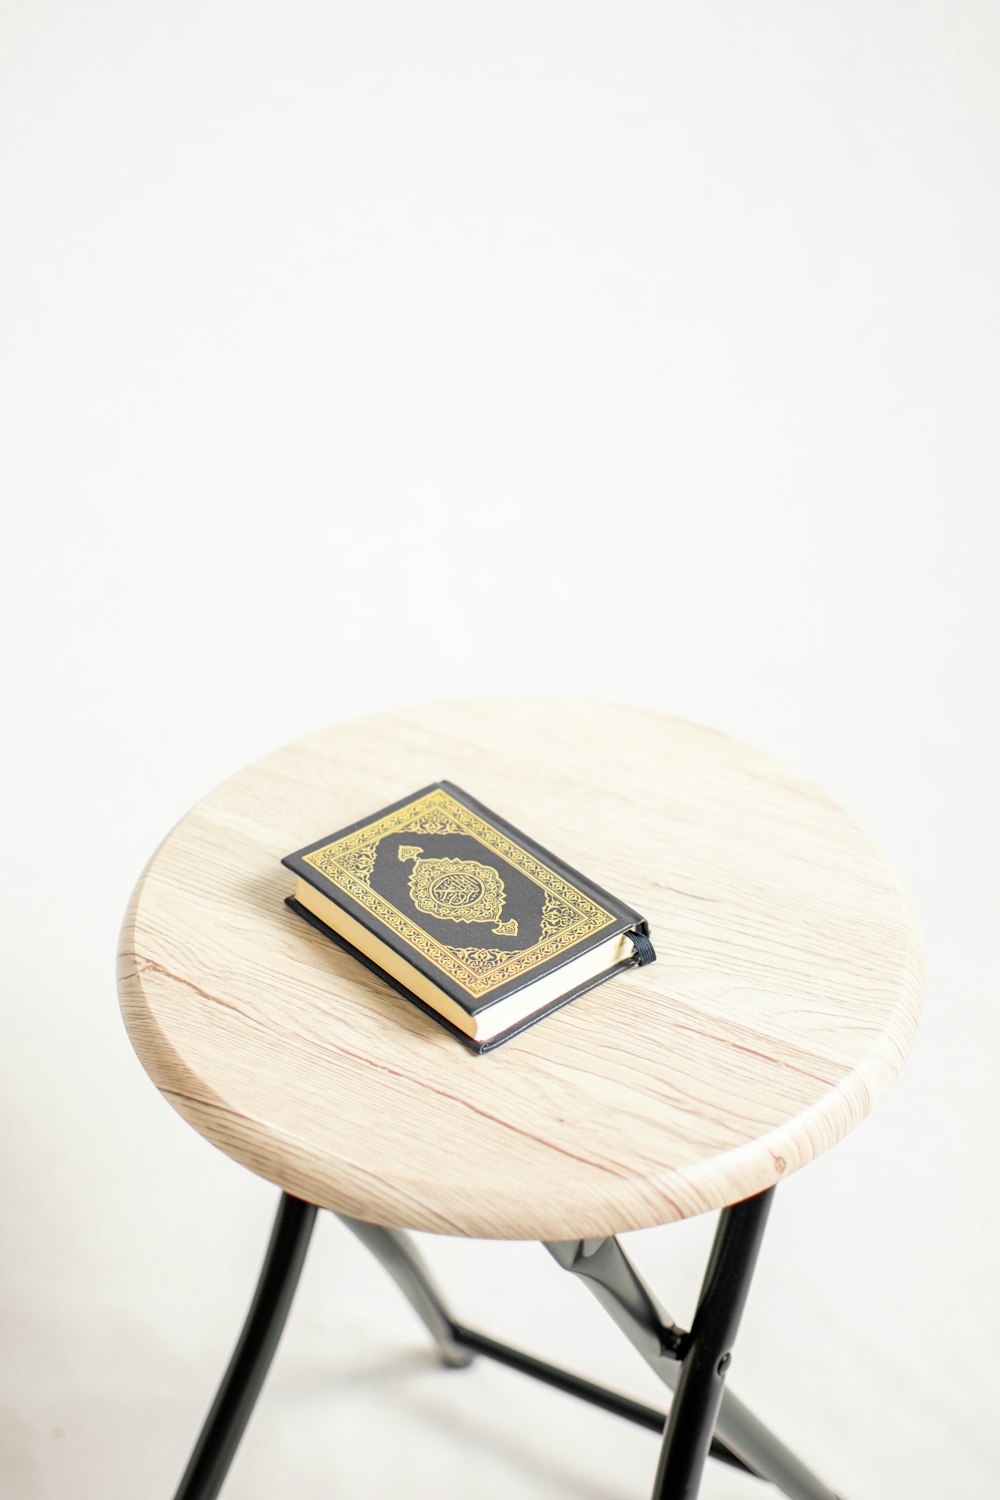 black and gold book on brown wooden seat